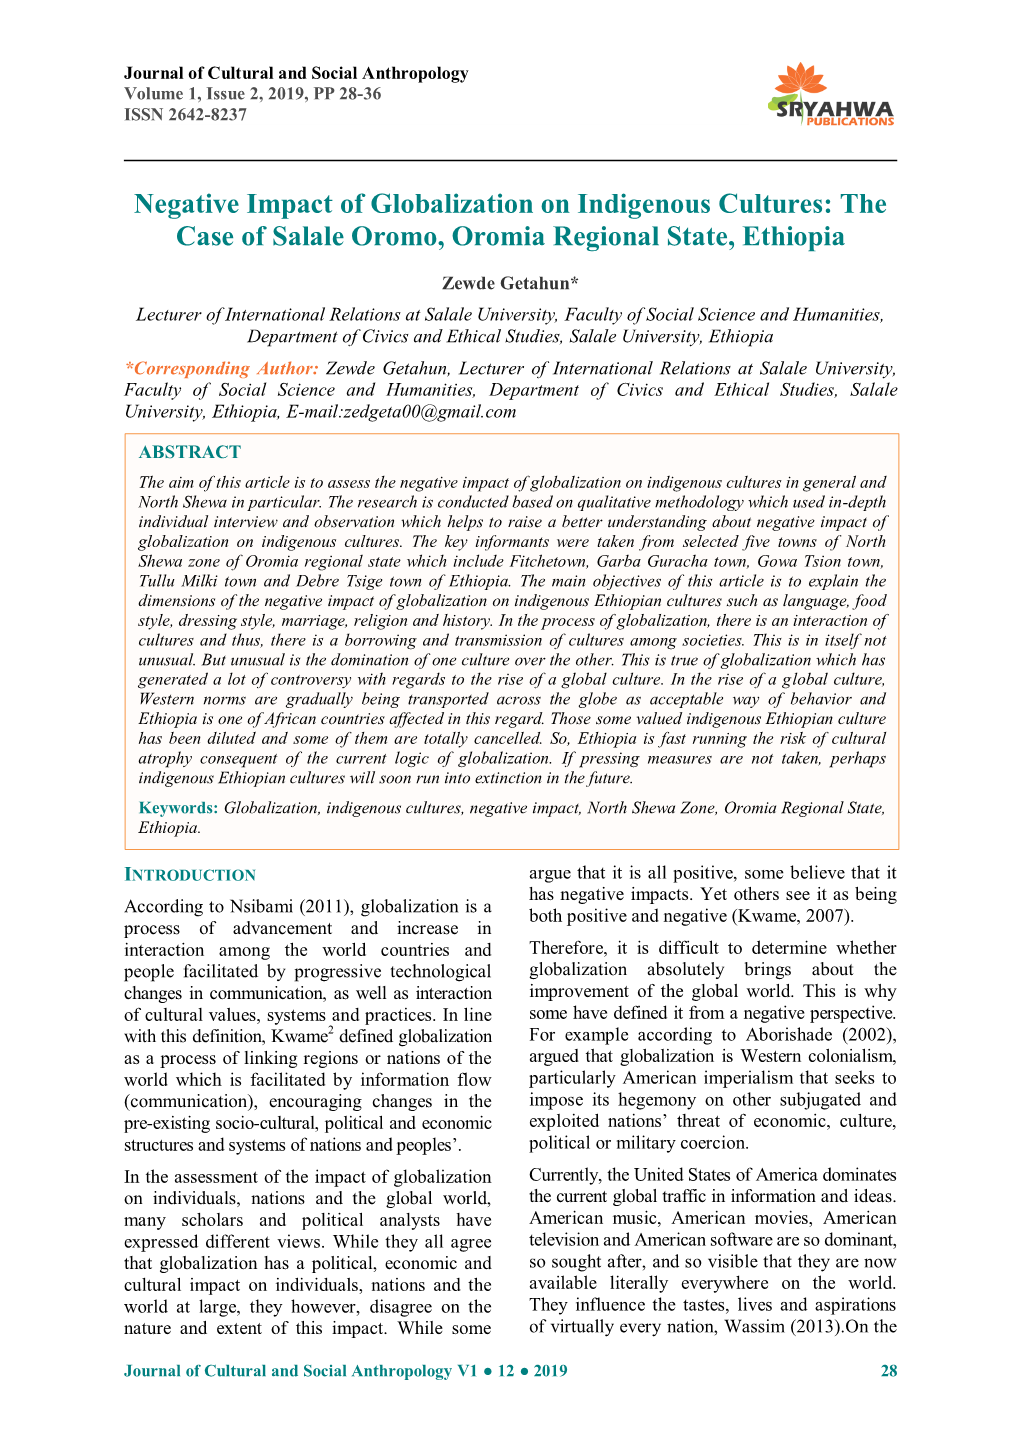 Negative Impact of Globalization on Indigenous Cultures: the Case of Salale Oromo, Oromia Regional State, Ethiopia